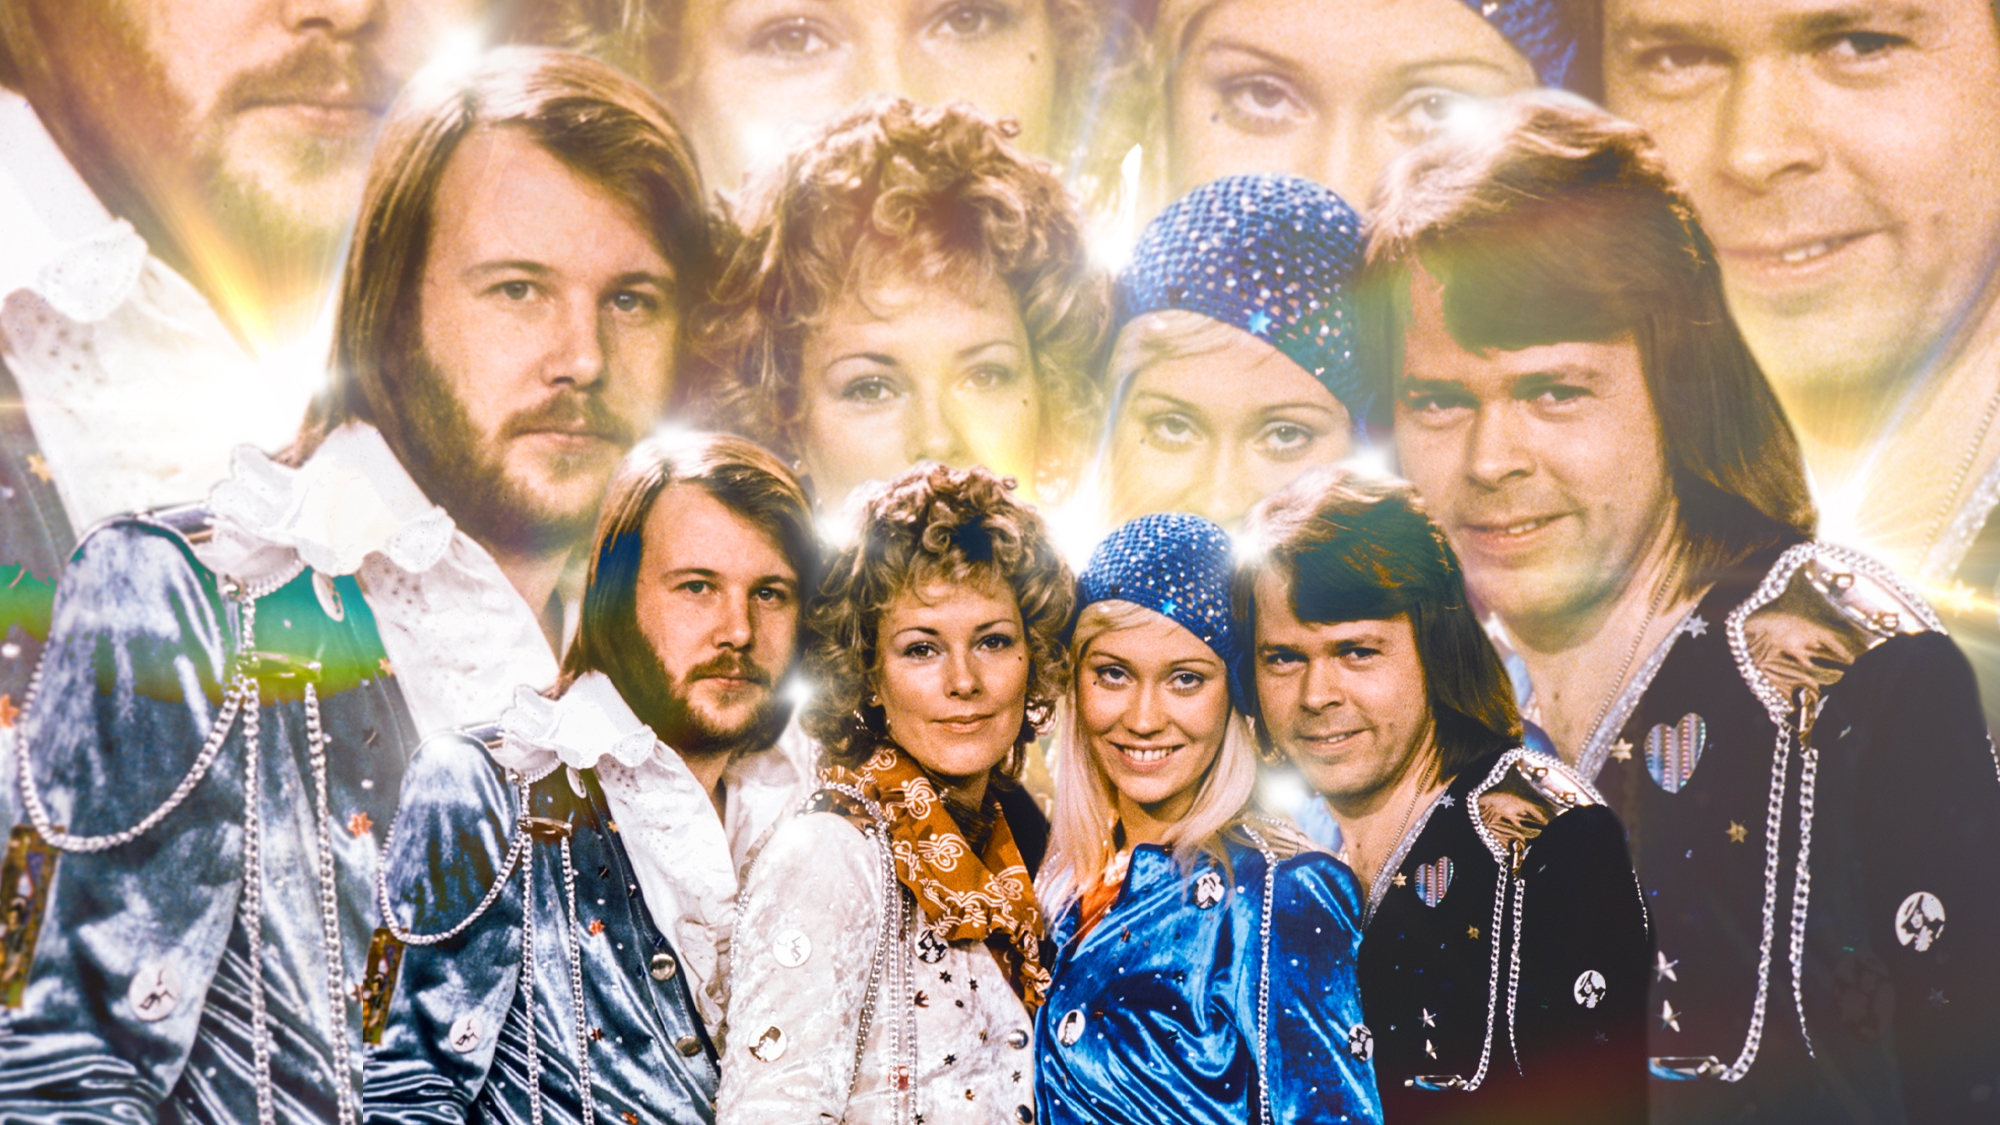 Beyond Mamma Mia!: Essential ABBA tracks, from the Gold to the obscure